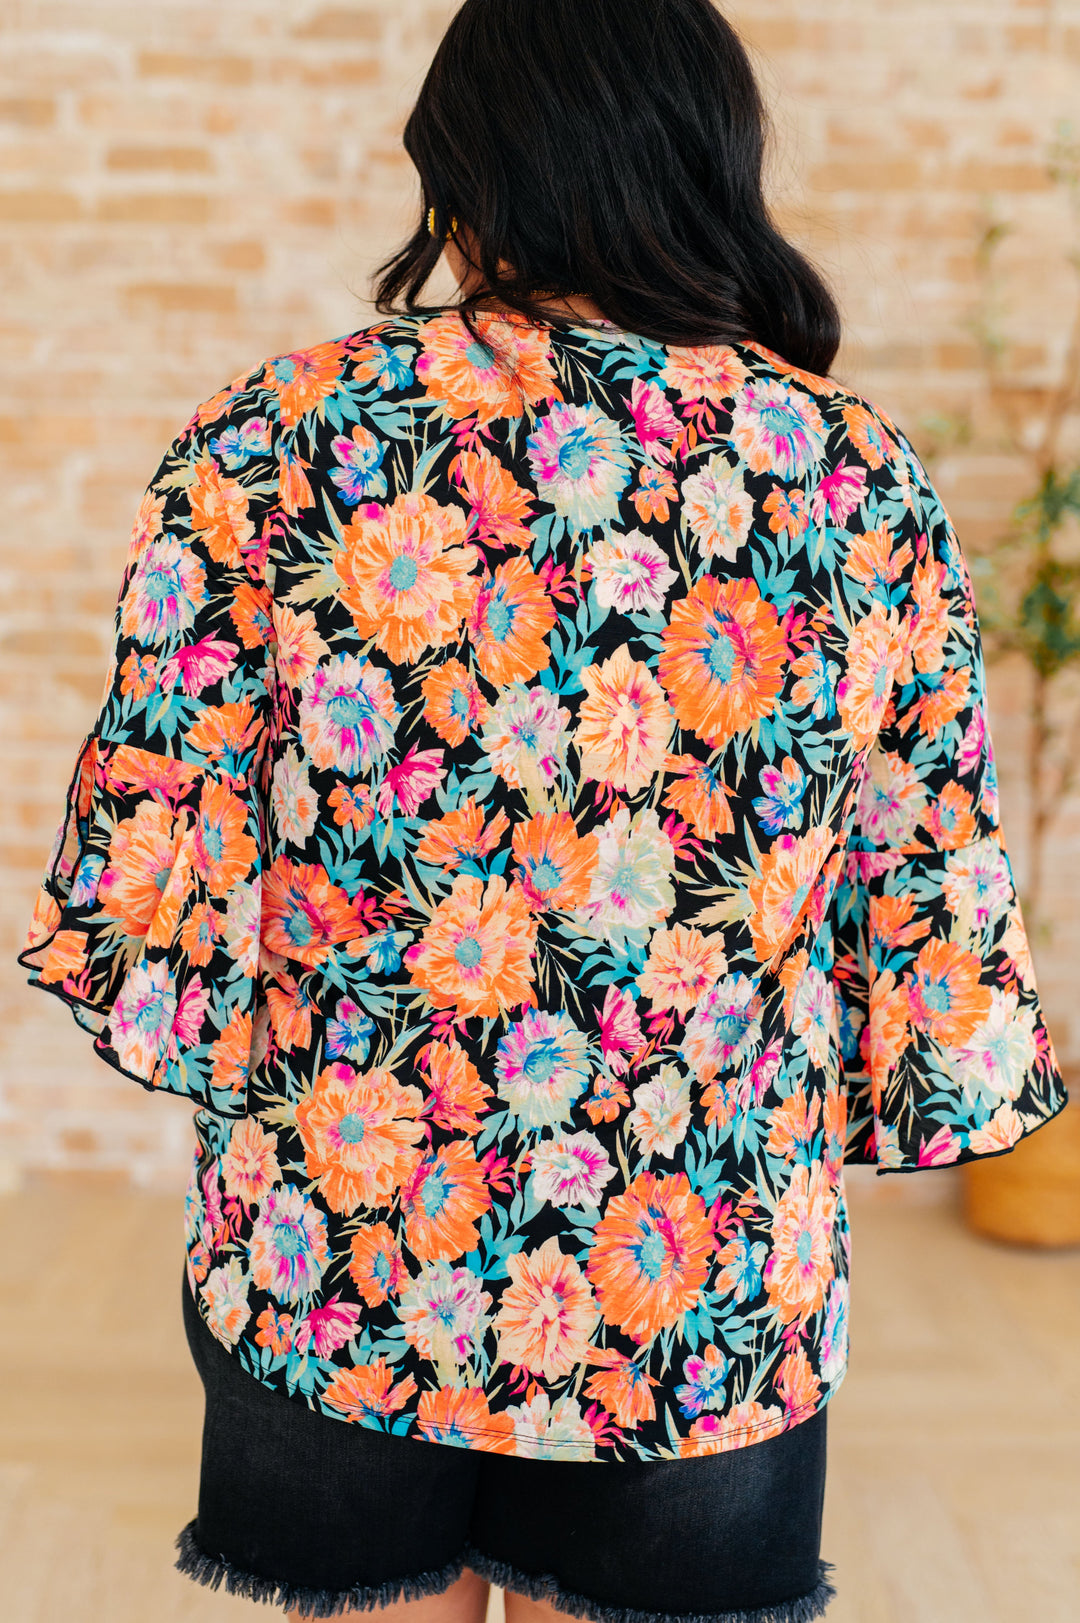 Bell-Sleeve Top in Black and Persimmon Floral